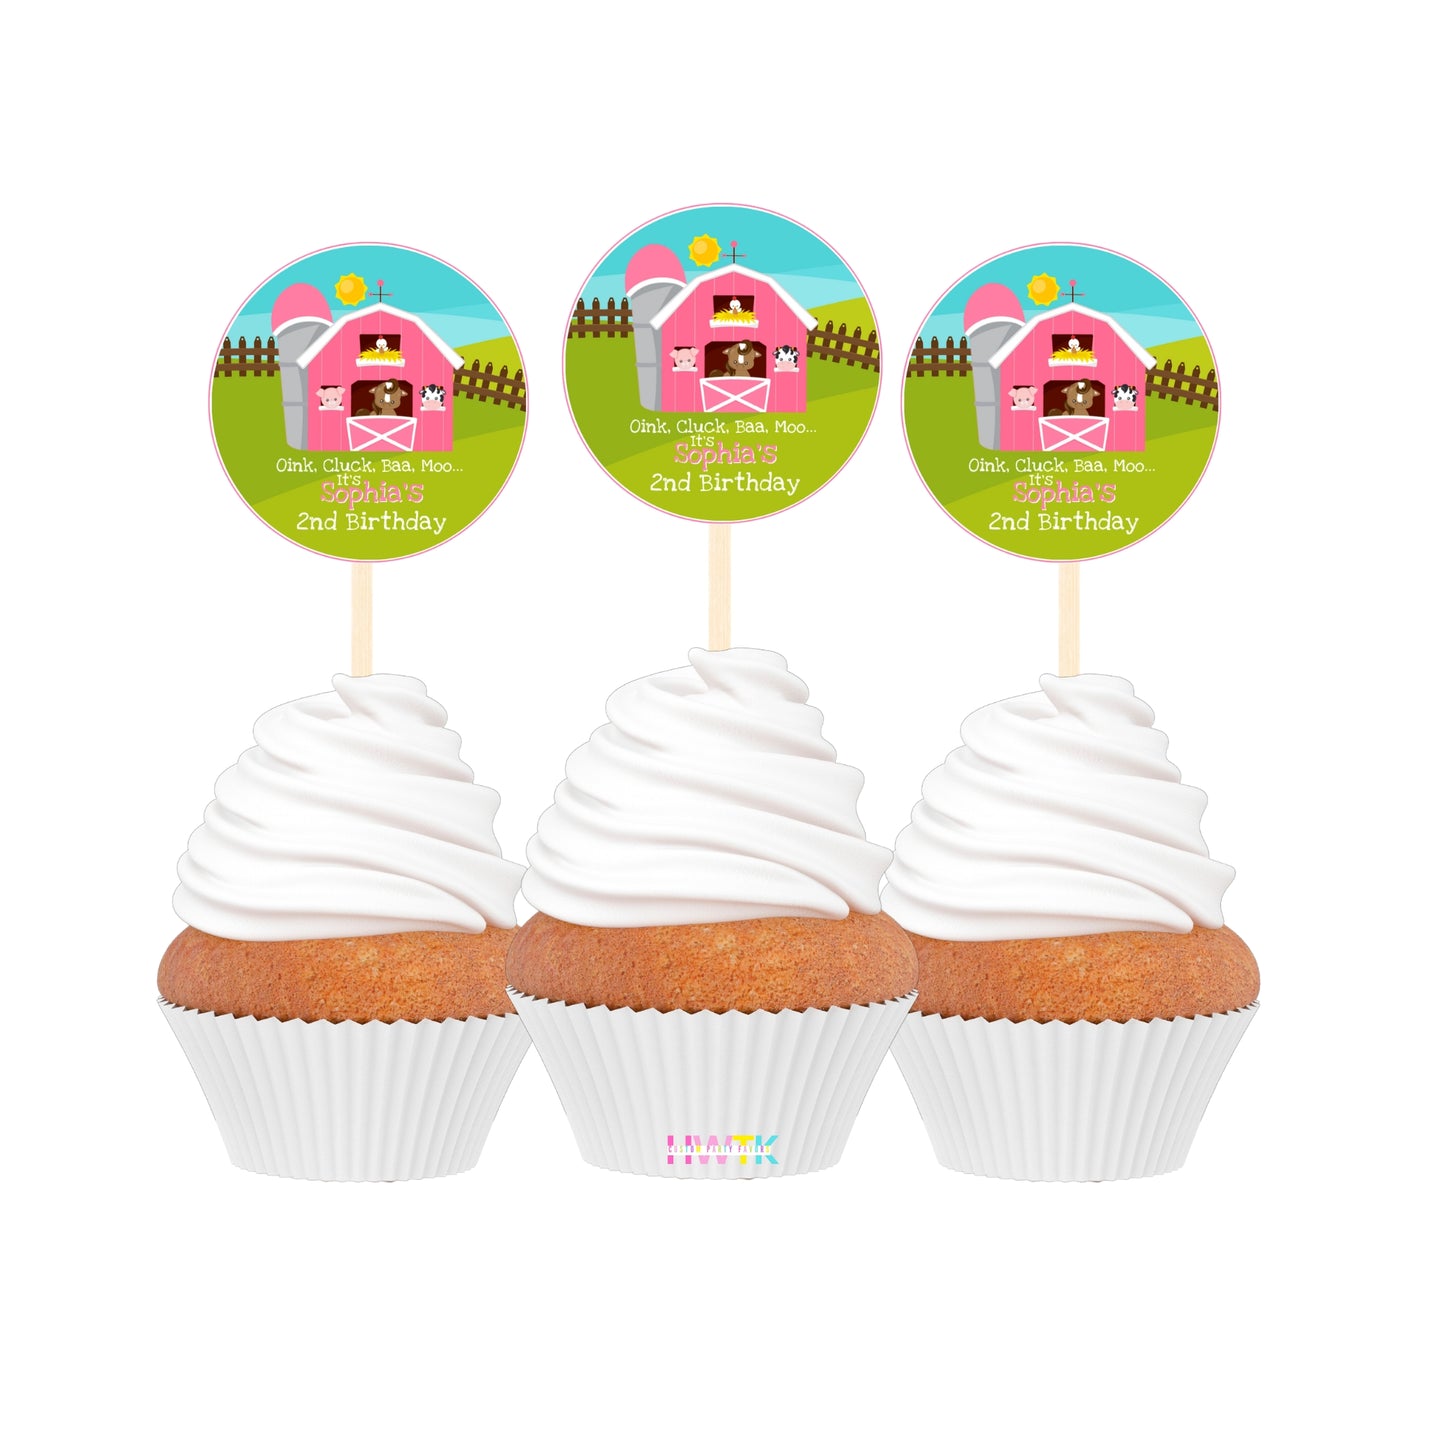 Pink Barnyard Farm Birthday Personalized 2” round Cupcake Toppers 12pc